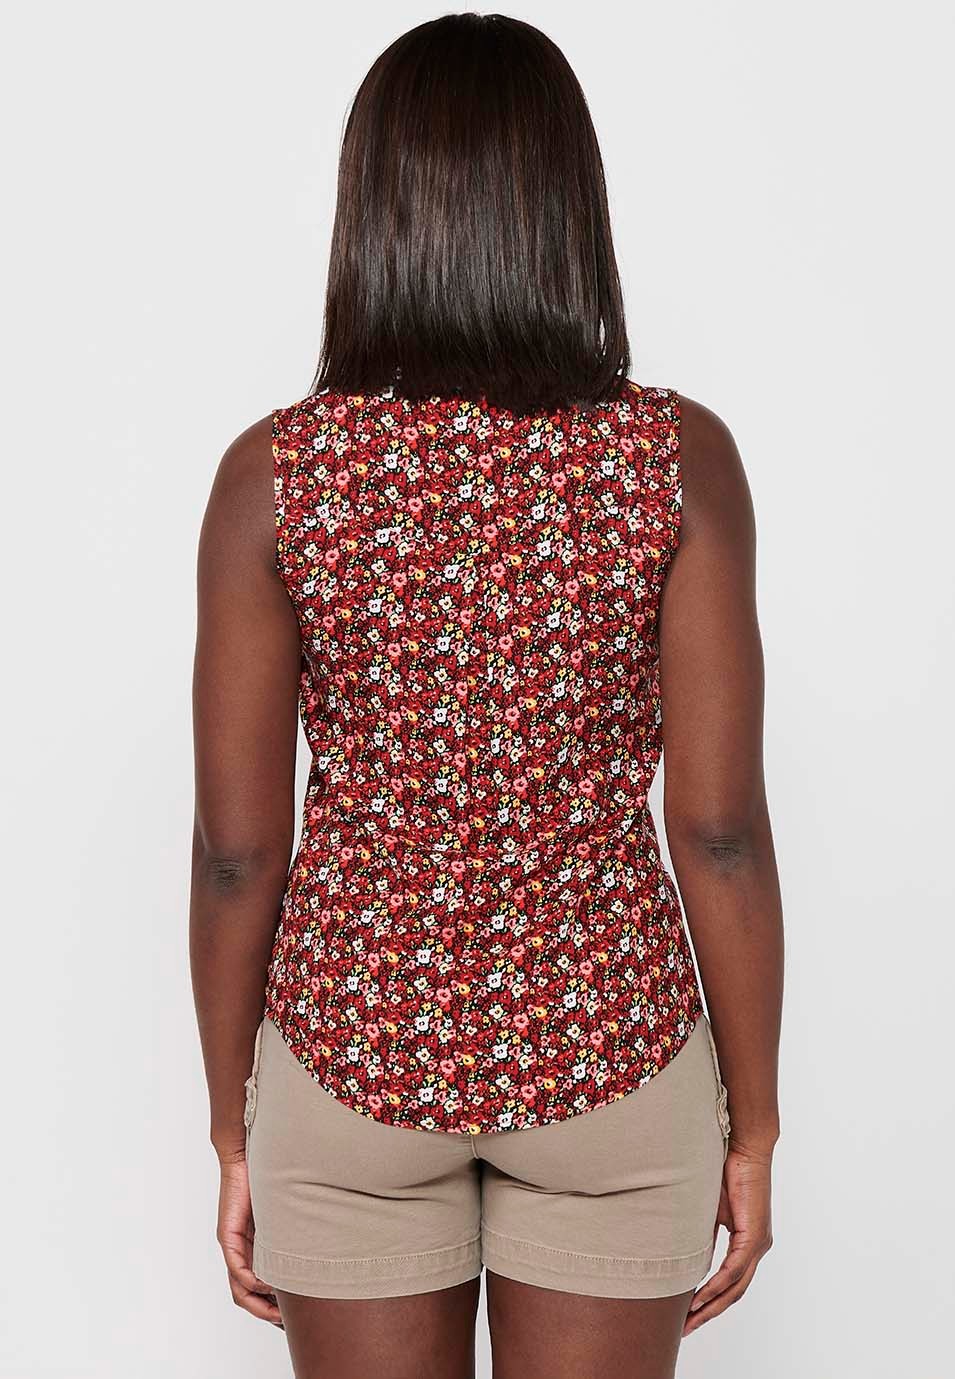 Women's Sleeveless V Neck Button Front Closure Floral Print Blouse Tops 8